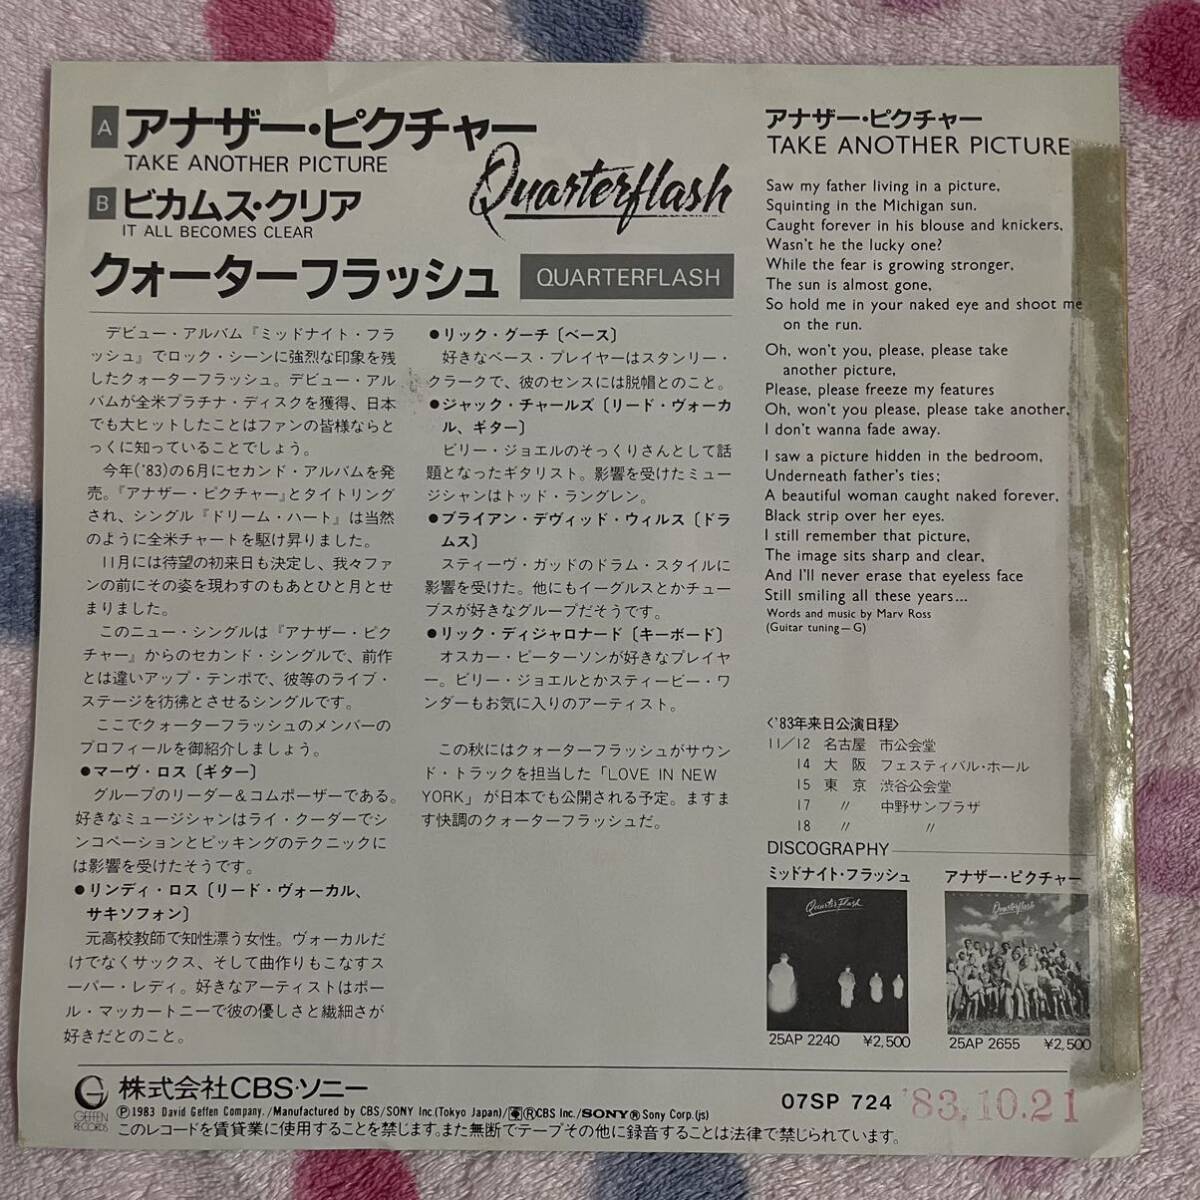 【7inch】◆即決◆美盤 中古■【QUARTERFLASH クォーターフラッシュ / TAKE ANOTHER PICTURE アナザーピクチャー】7インチ EP■07SP724_画像2